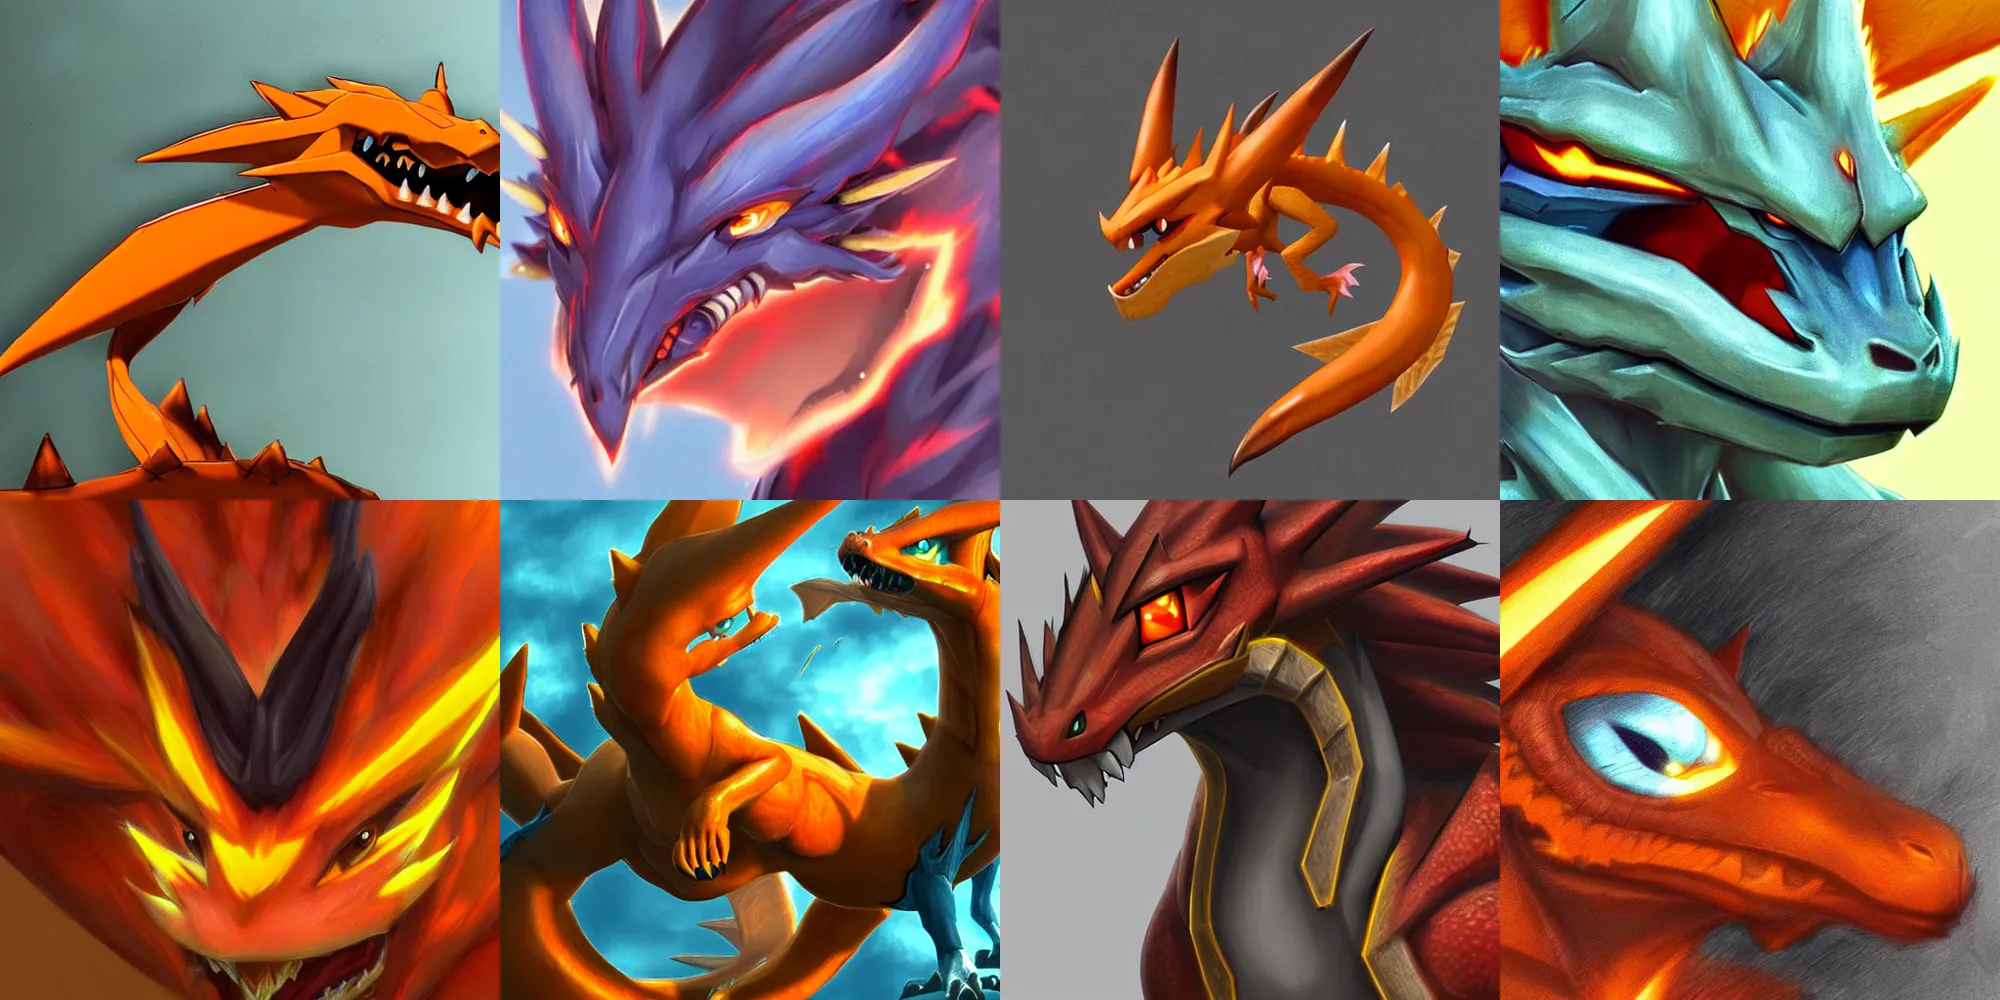 Prompt: charizard, close up headshot extremely detailed, 3d charizard Pokémon, orange dragon artwork character design by wlop, arvalis, George lucas, artgerm, in the style of League of legends, ARK survival, Skyrim HD, Breath of the wild, amazing artwork on artstation high detail, detailed feathers, textures, scales and fur, 3d render